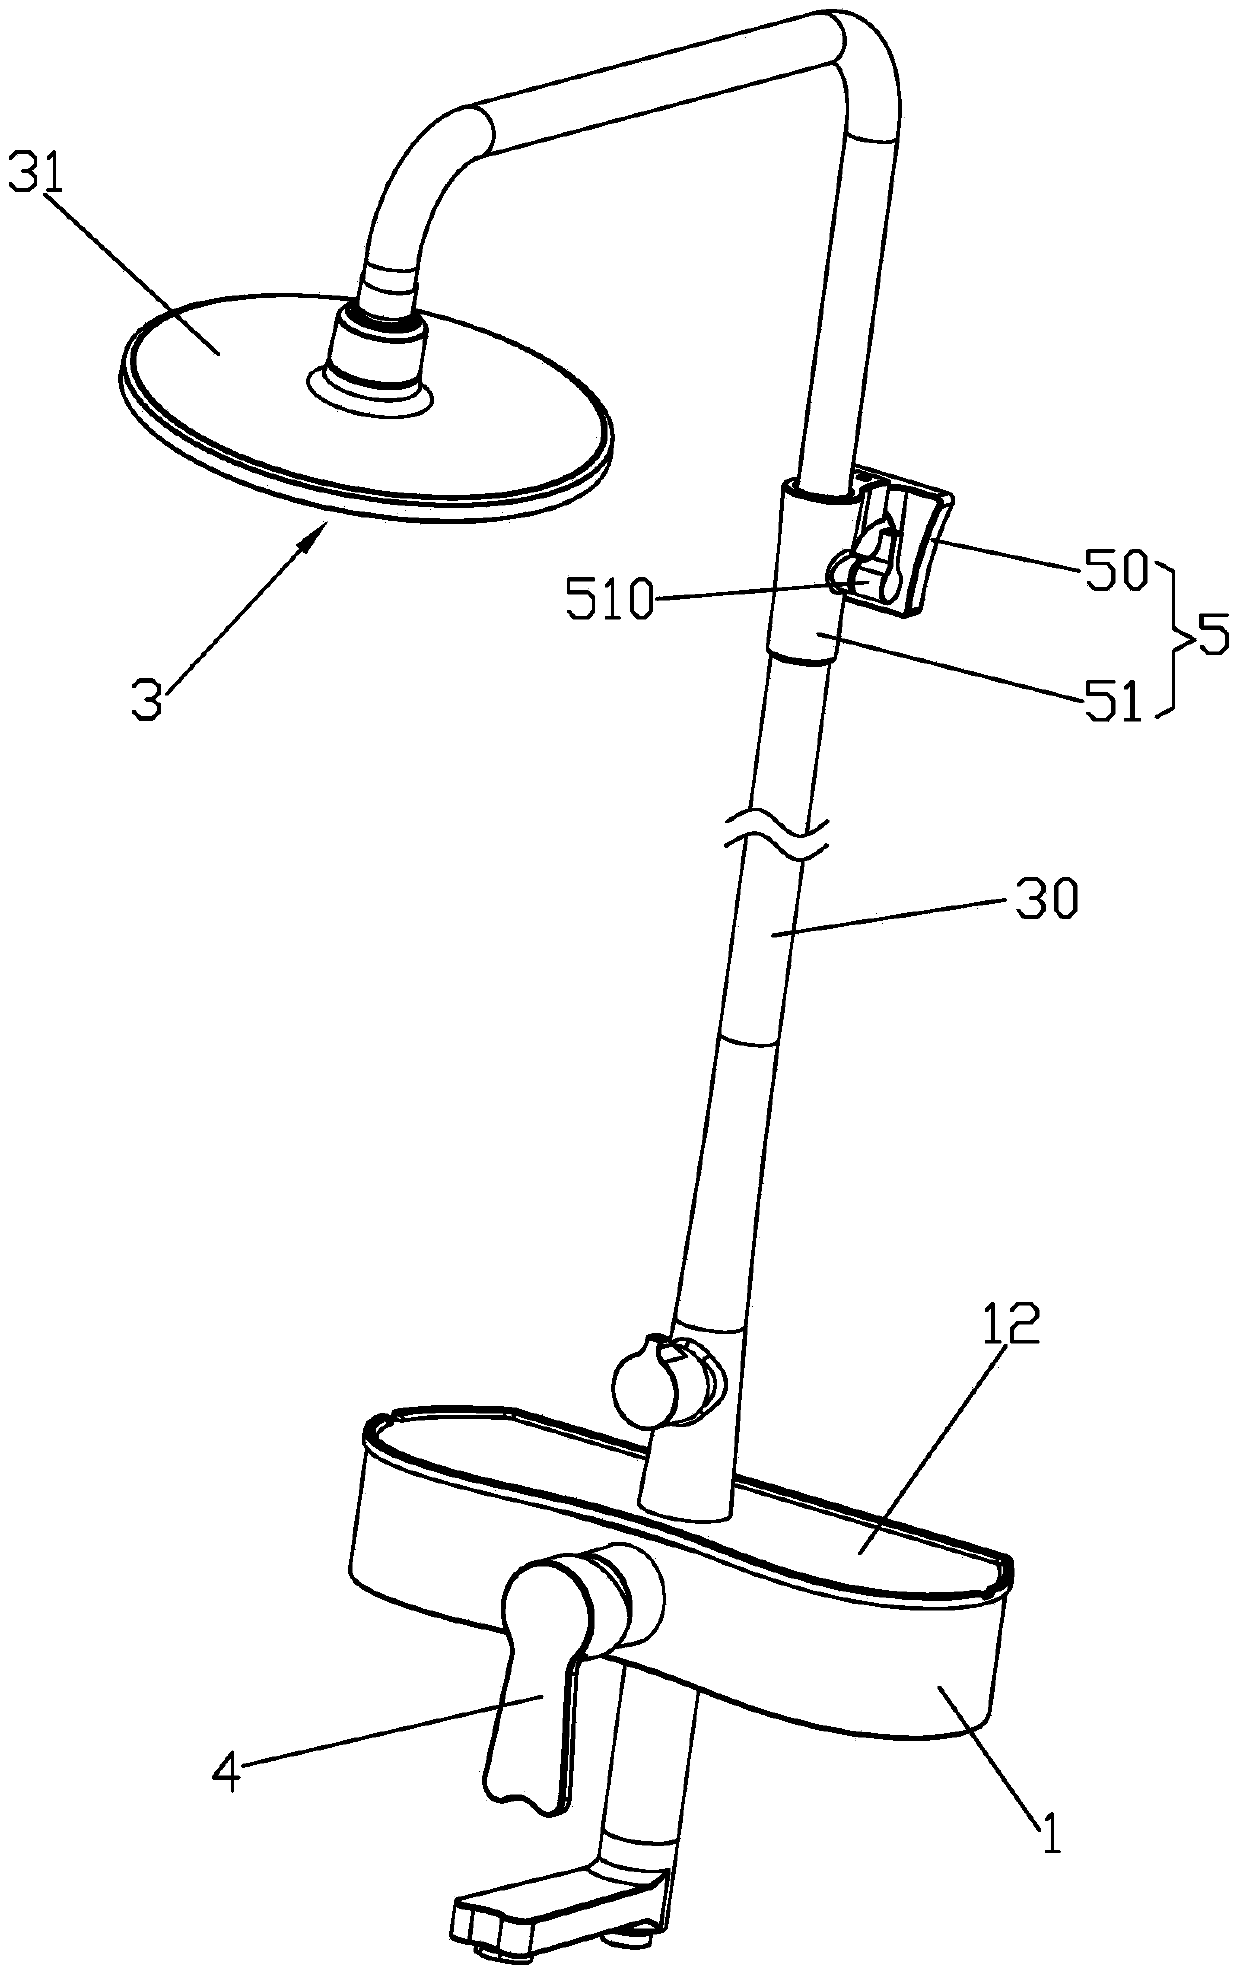 Fast installing structure of showering assembly with object placing table box